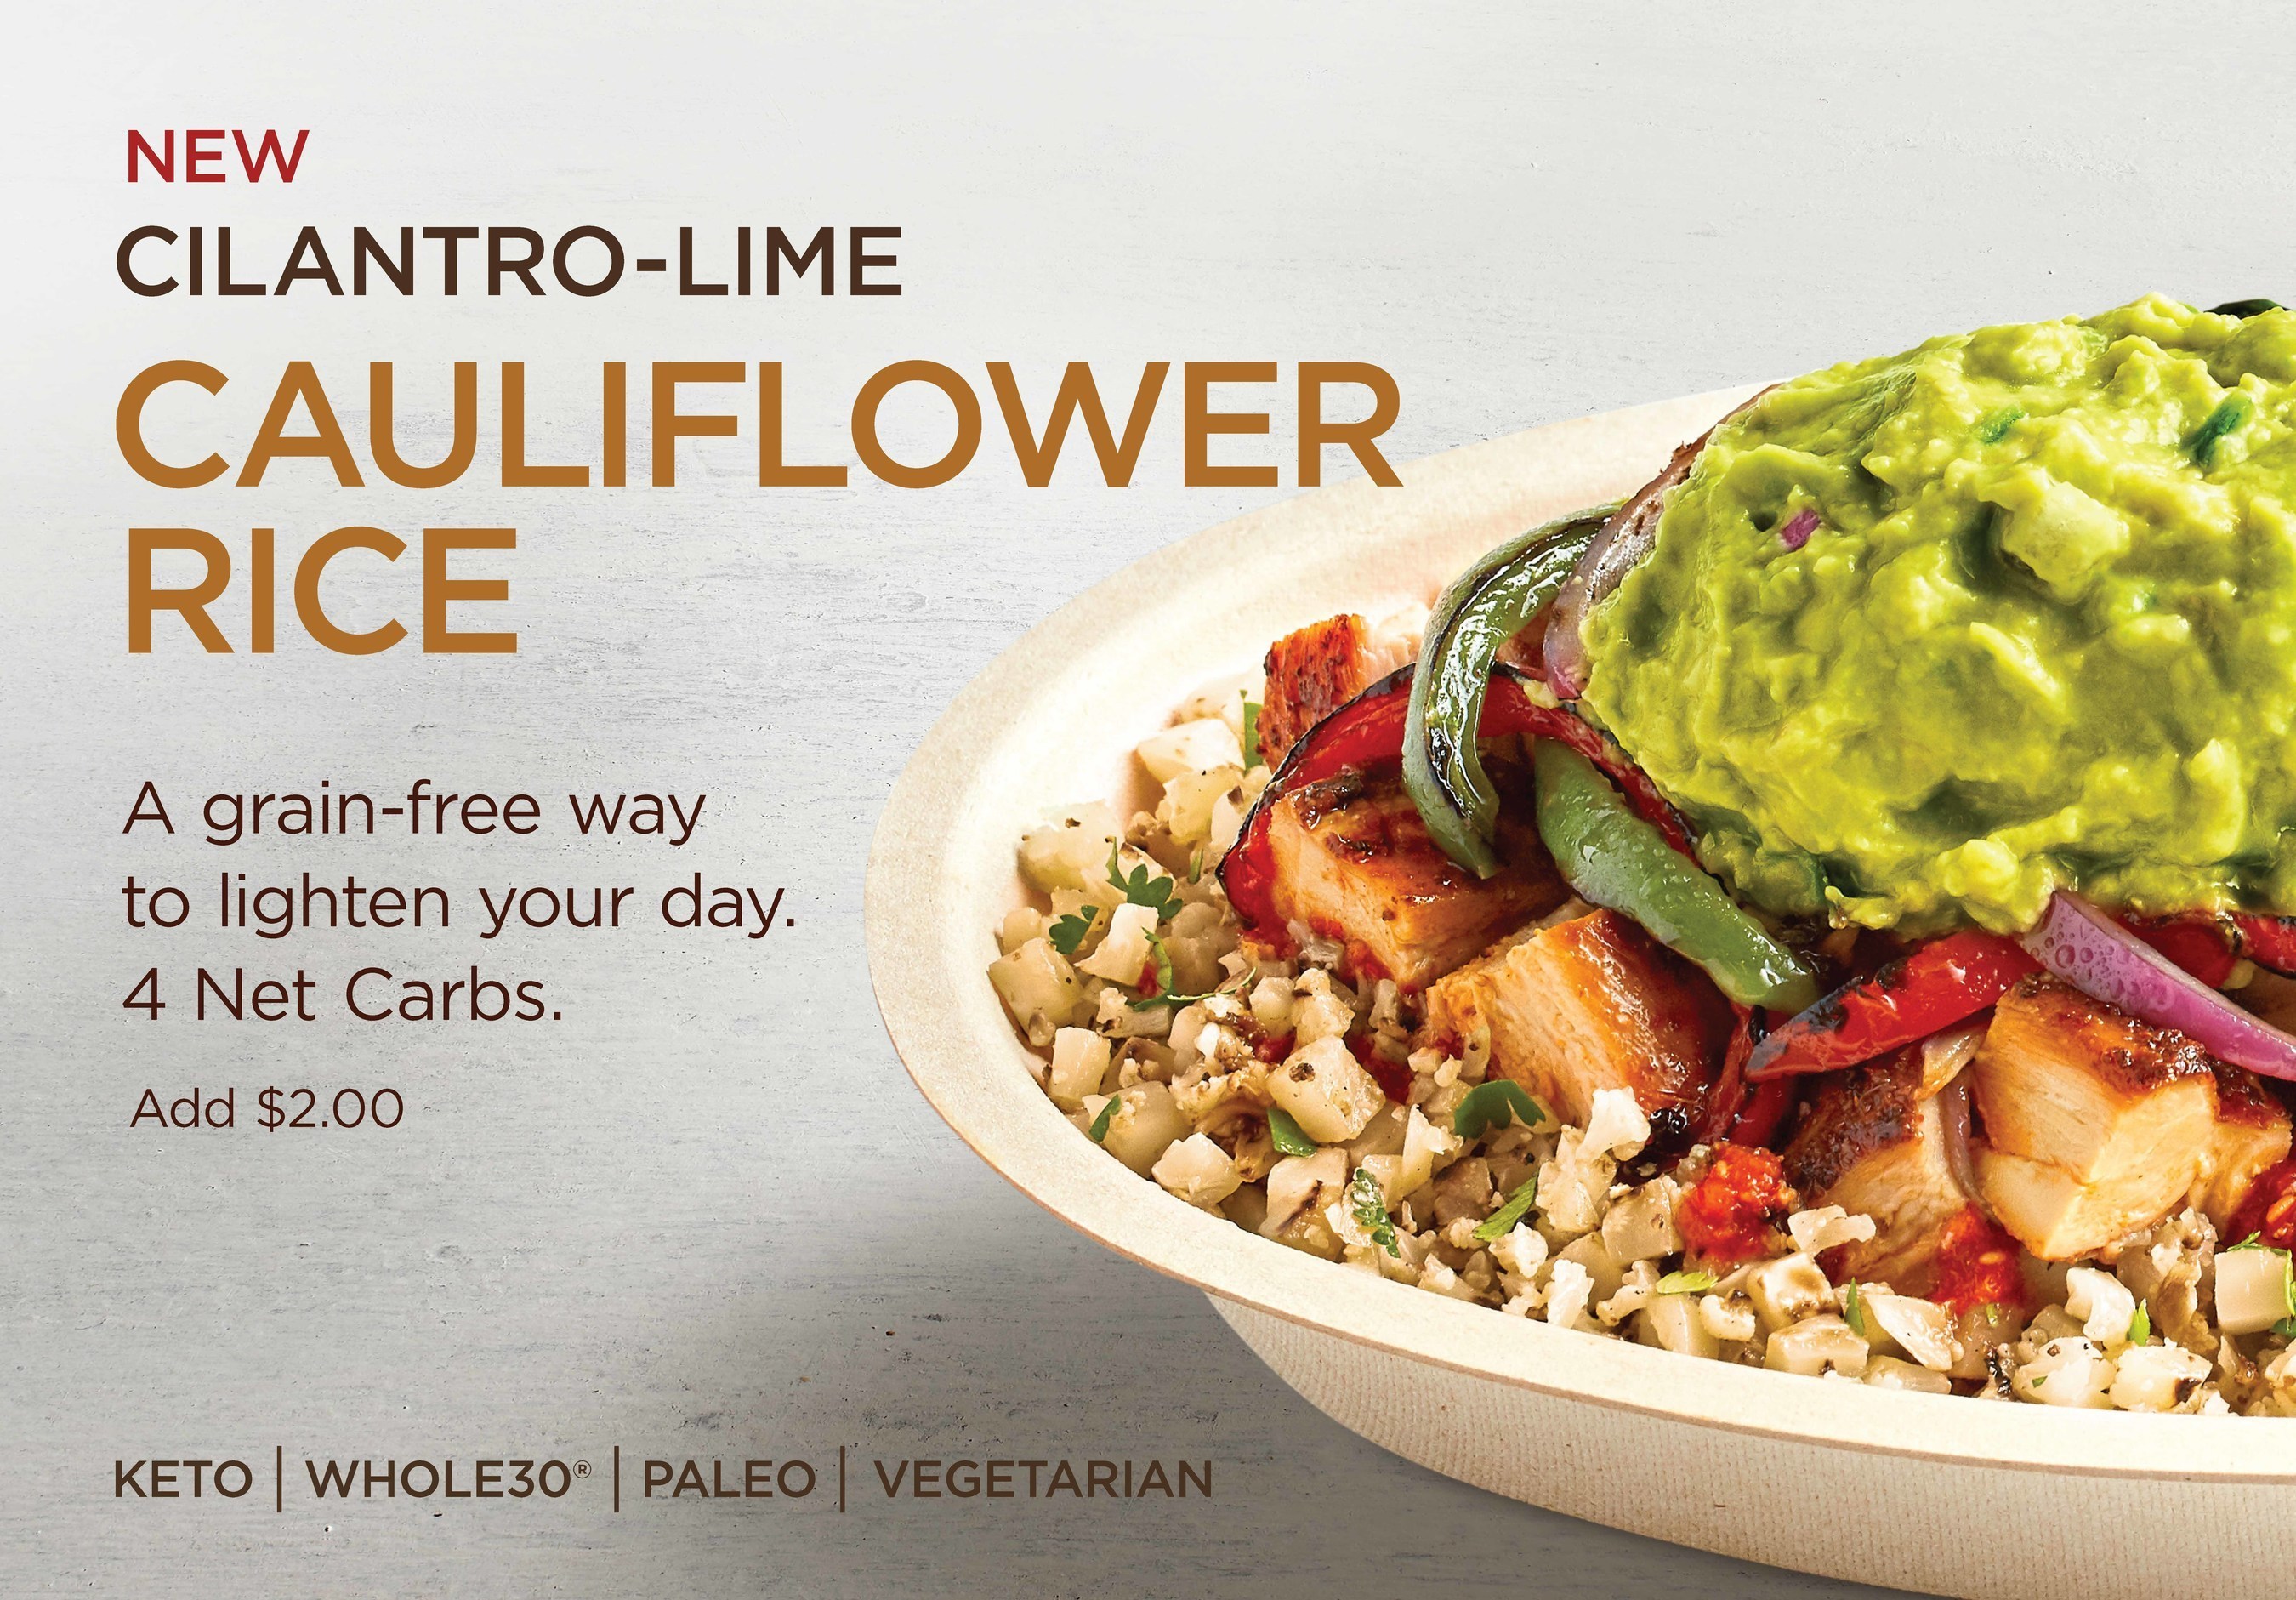 Is Chipotle S New Cauliflower Rice Healthier Than White Or Brown Rice